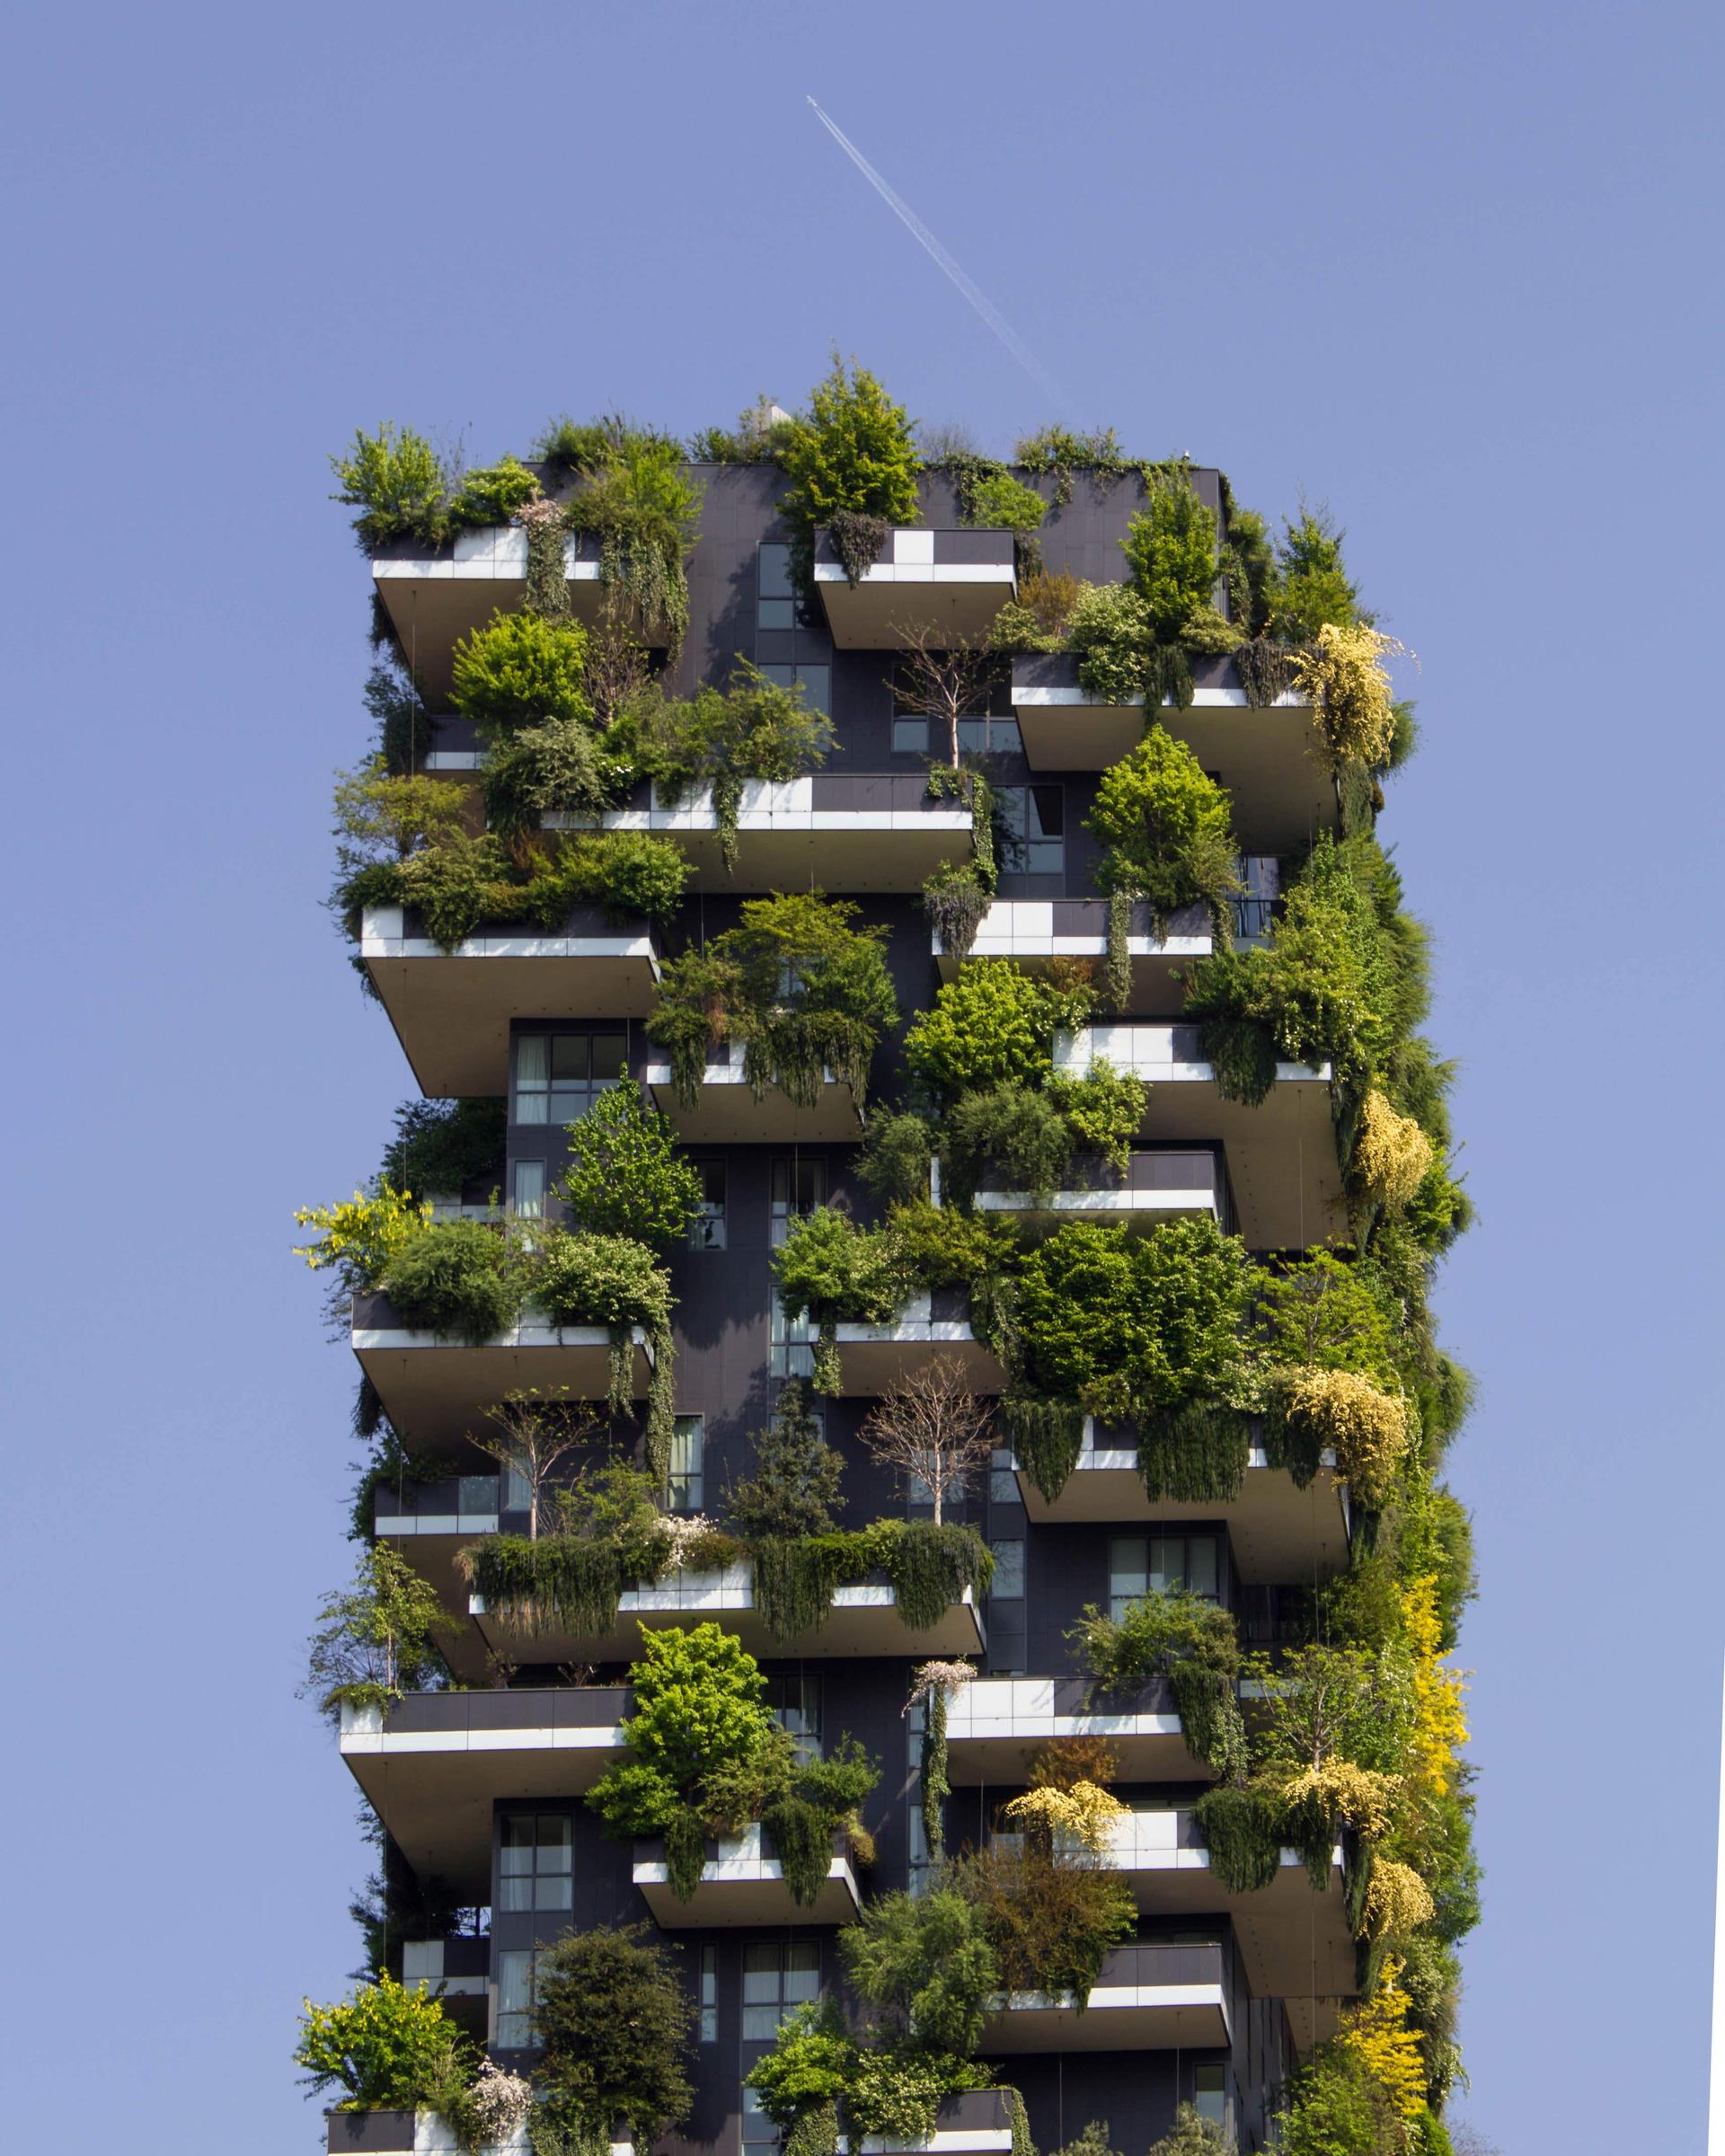 A high tower building full of plants